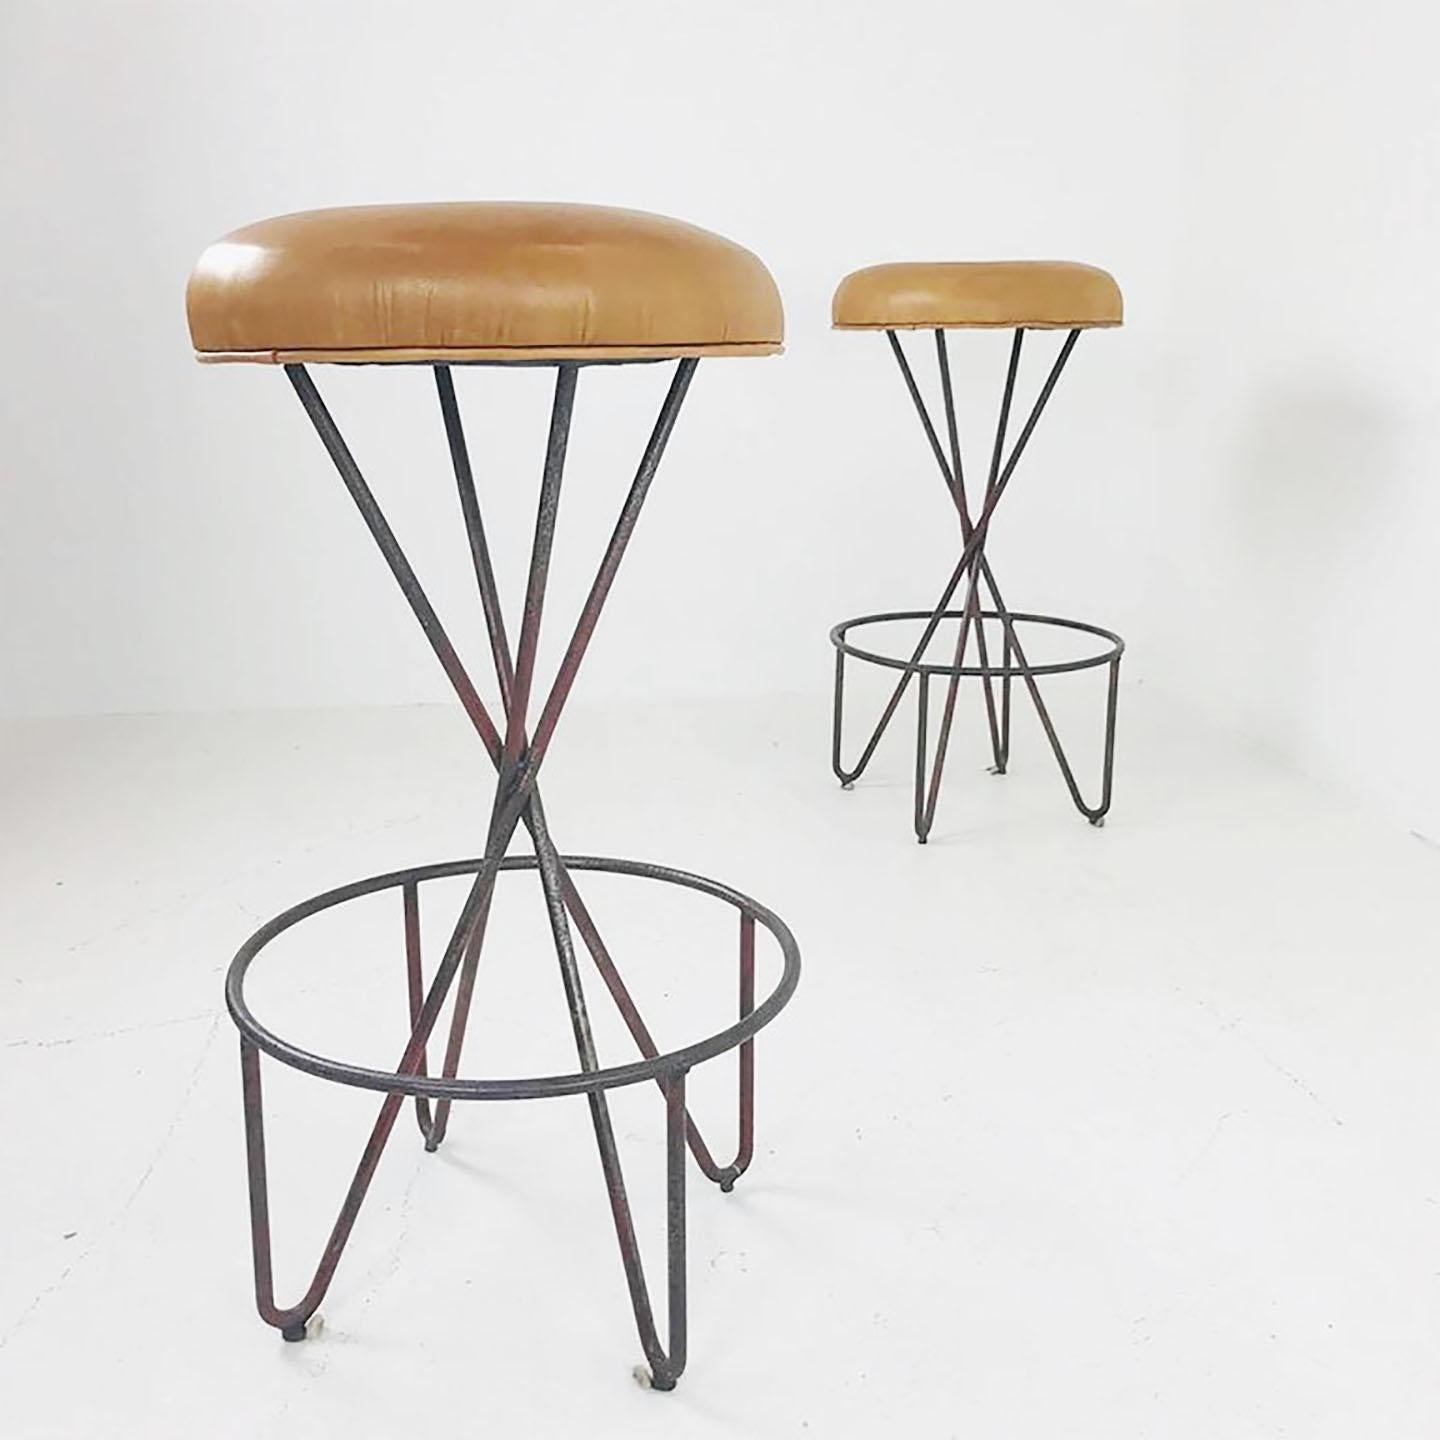 Pair of wrought iron Weinberg barstools. Stools are in good vintage condition with wear due to age and use.

Dimensions:
17” diameter x 32” tall.